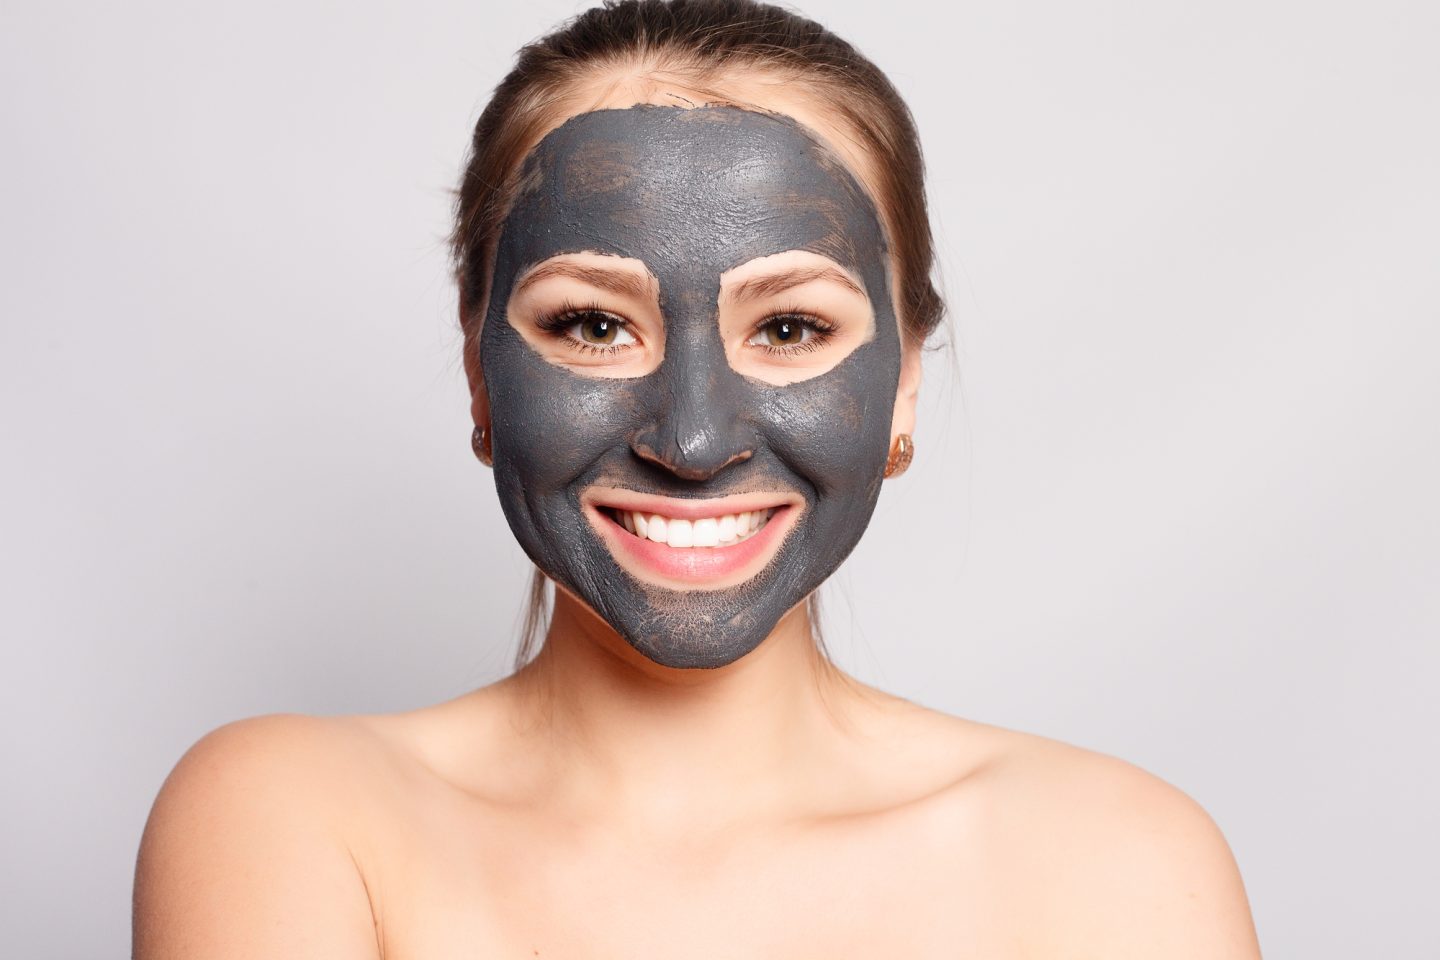 Do Certain Foods or Lifestyle Habits Contribute to The Formation of Blackheads?